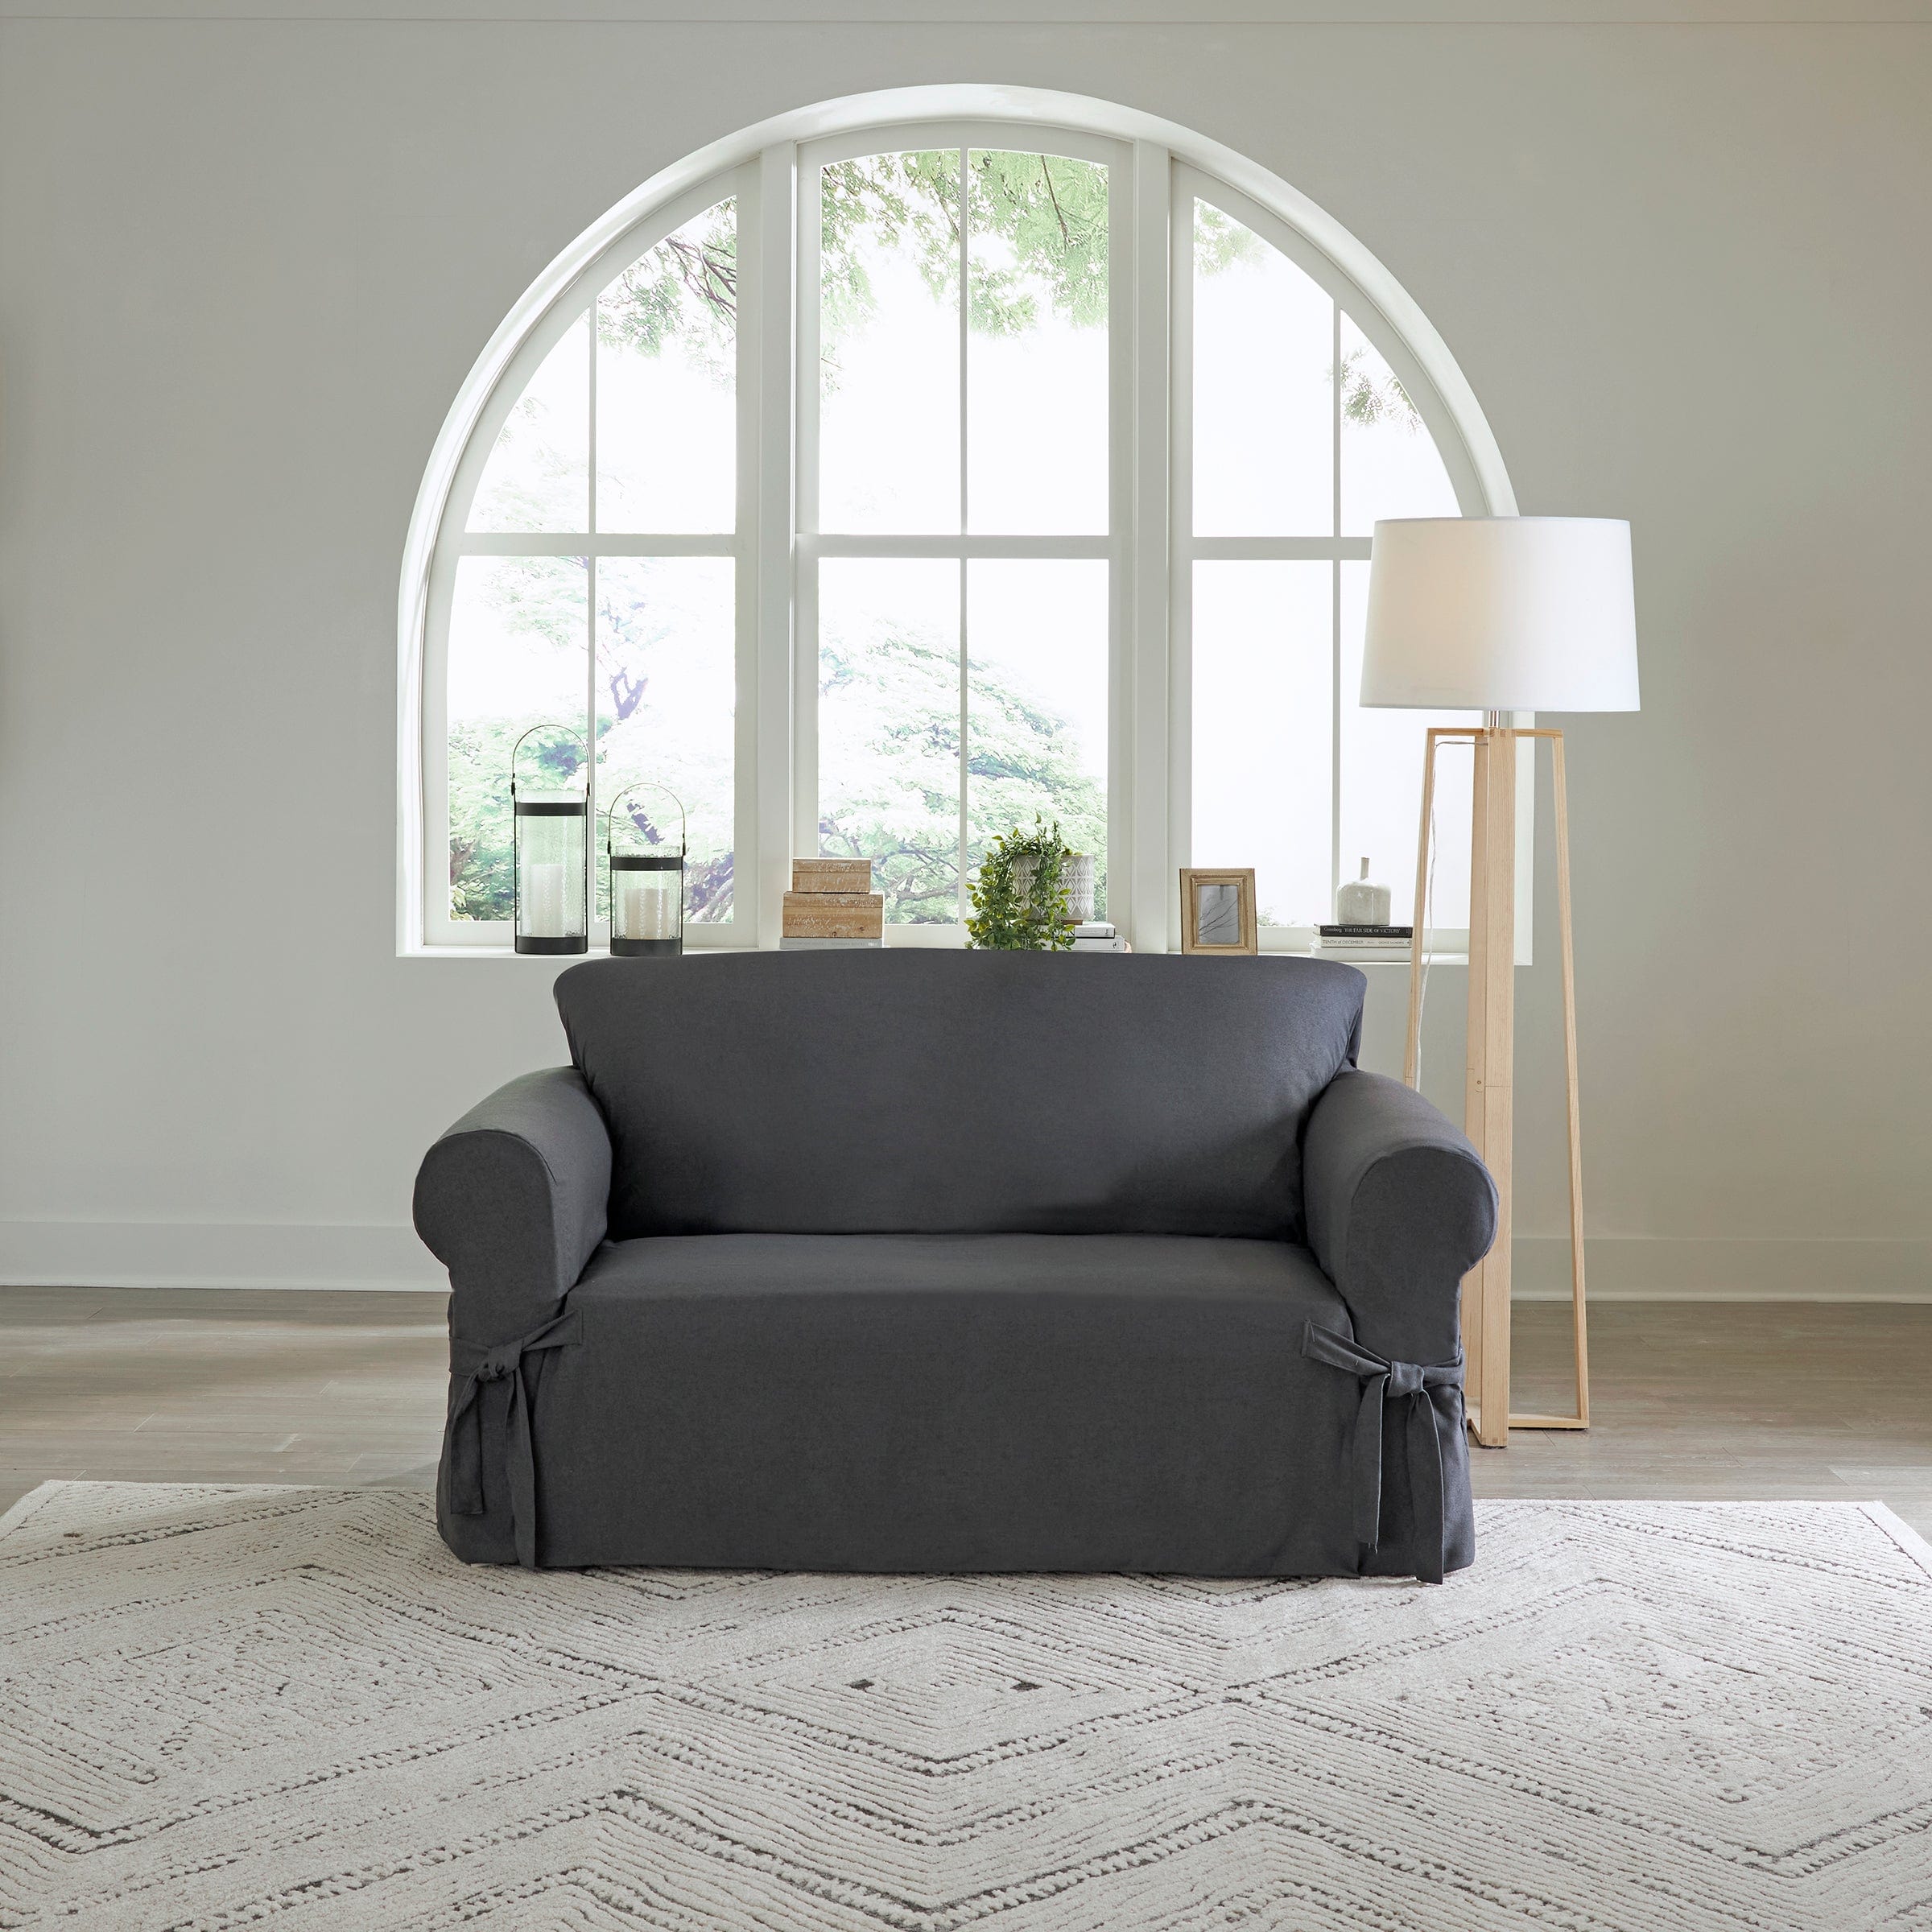 Fall into Savings with SureFit's 20% OFF Slipcover Sale! 🍂 - Sure Fit